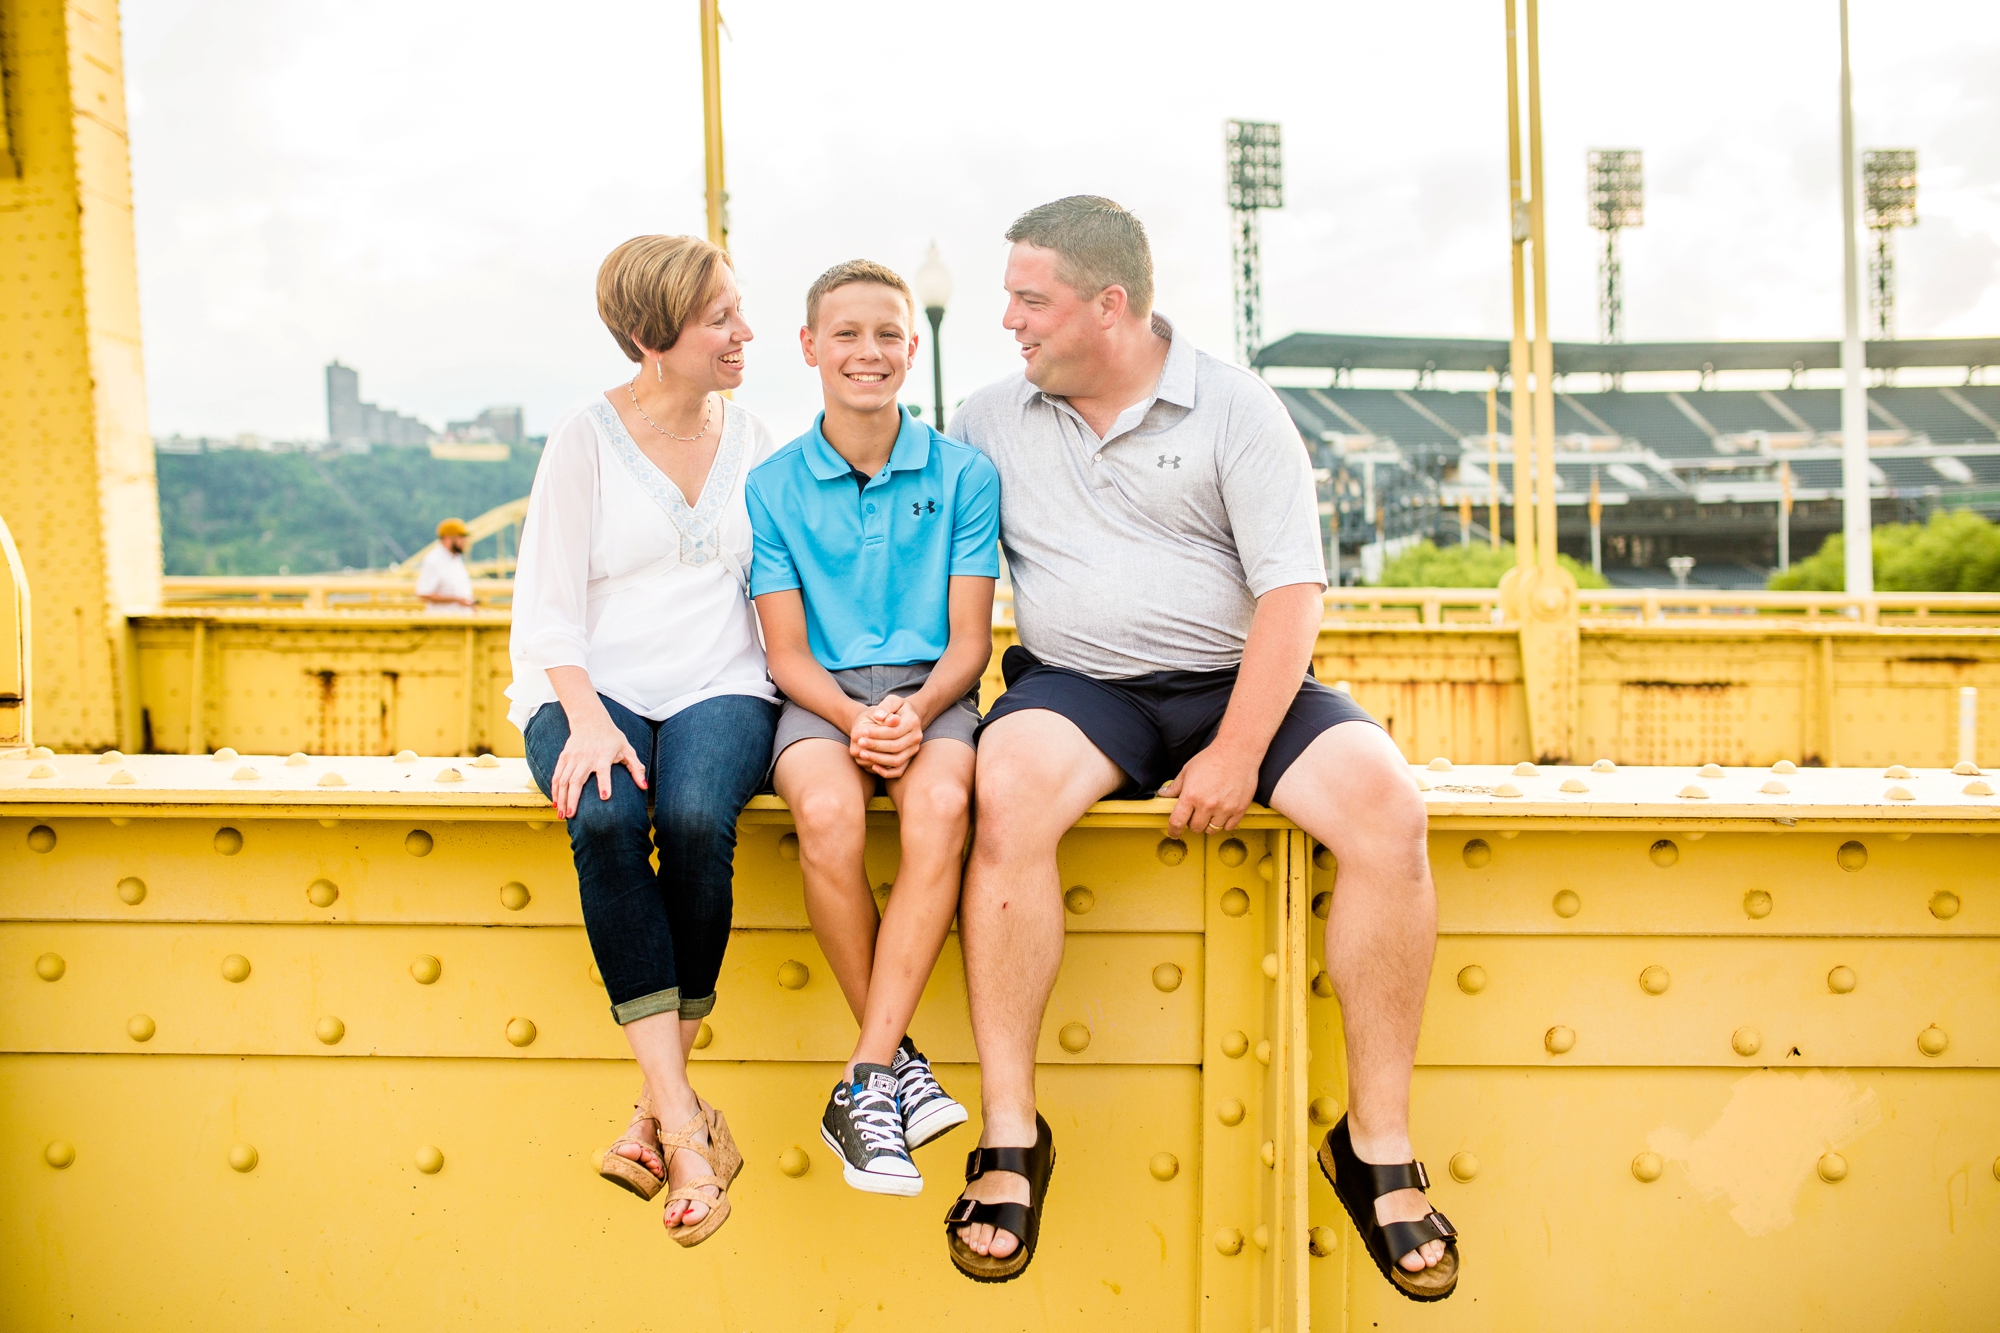 north shore family photos, pittsburgh family photographer, locations in pittsburgh for photo shoot, cranberry township family photographer, roberto clemente bridge photos 